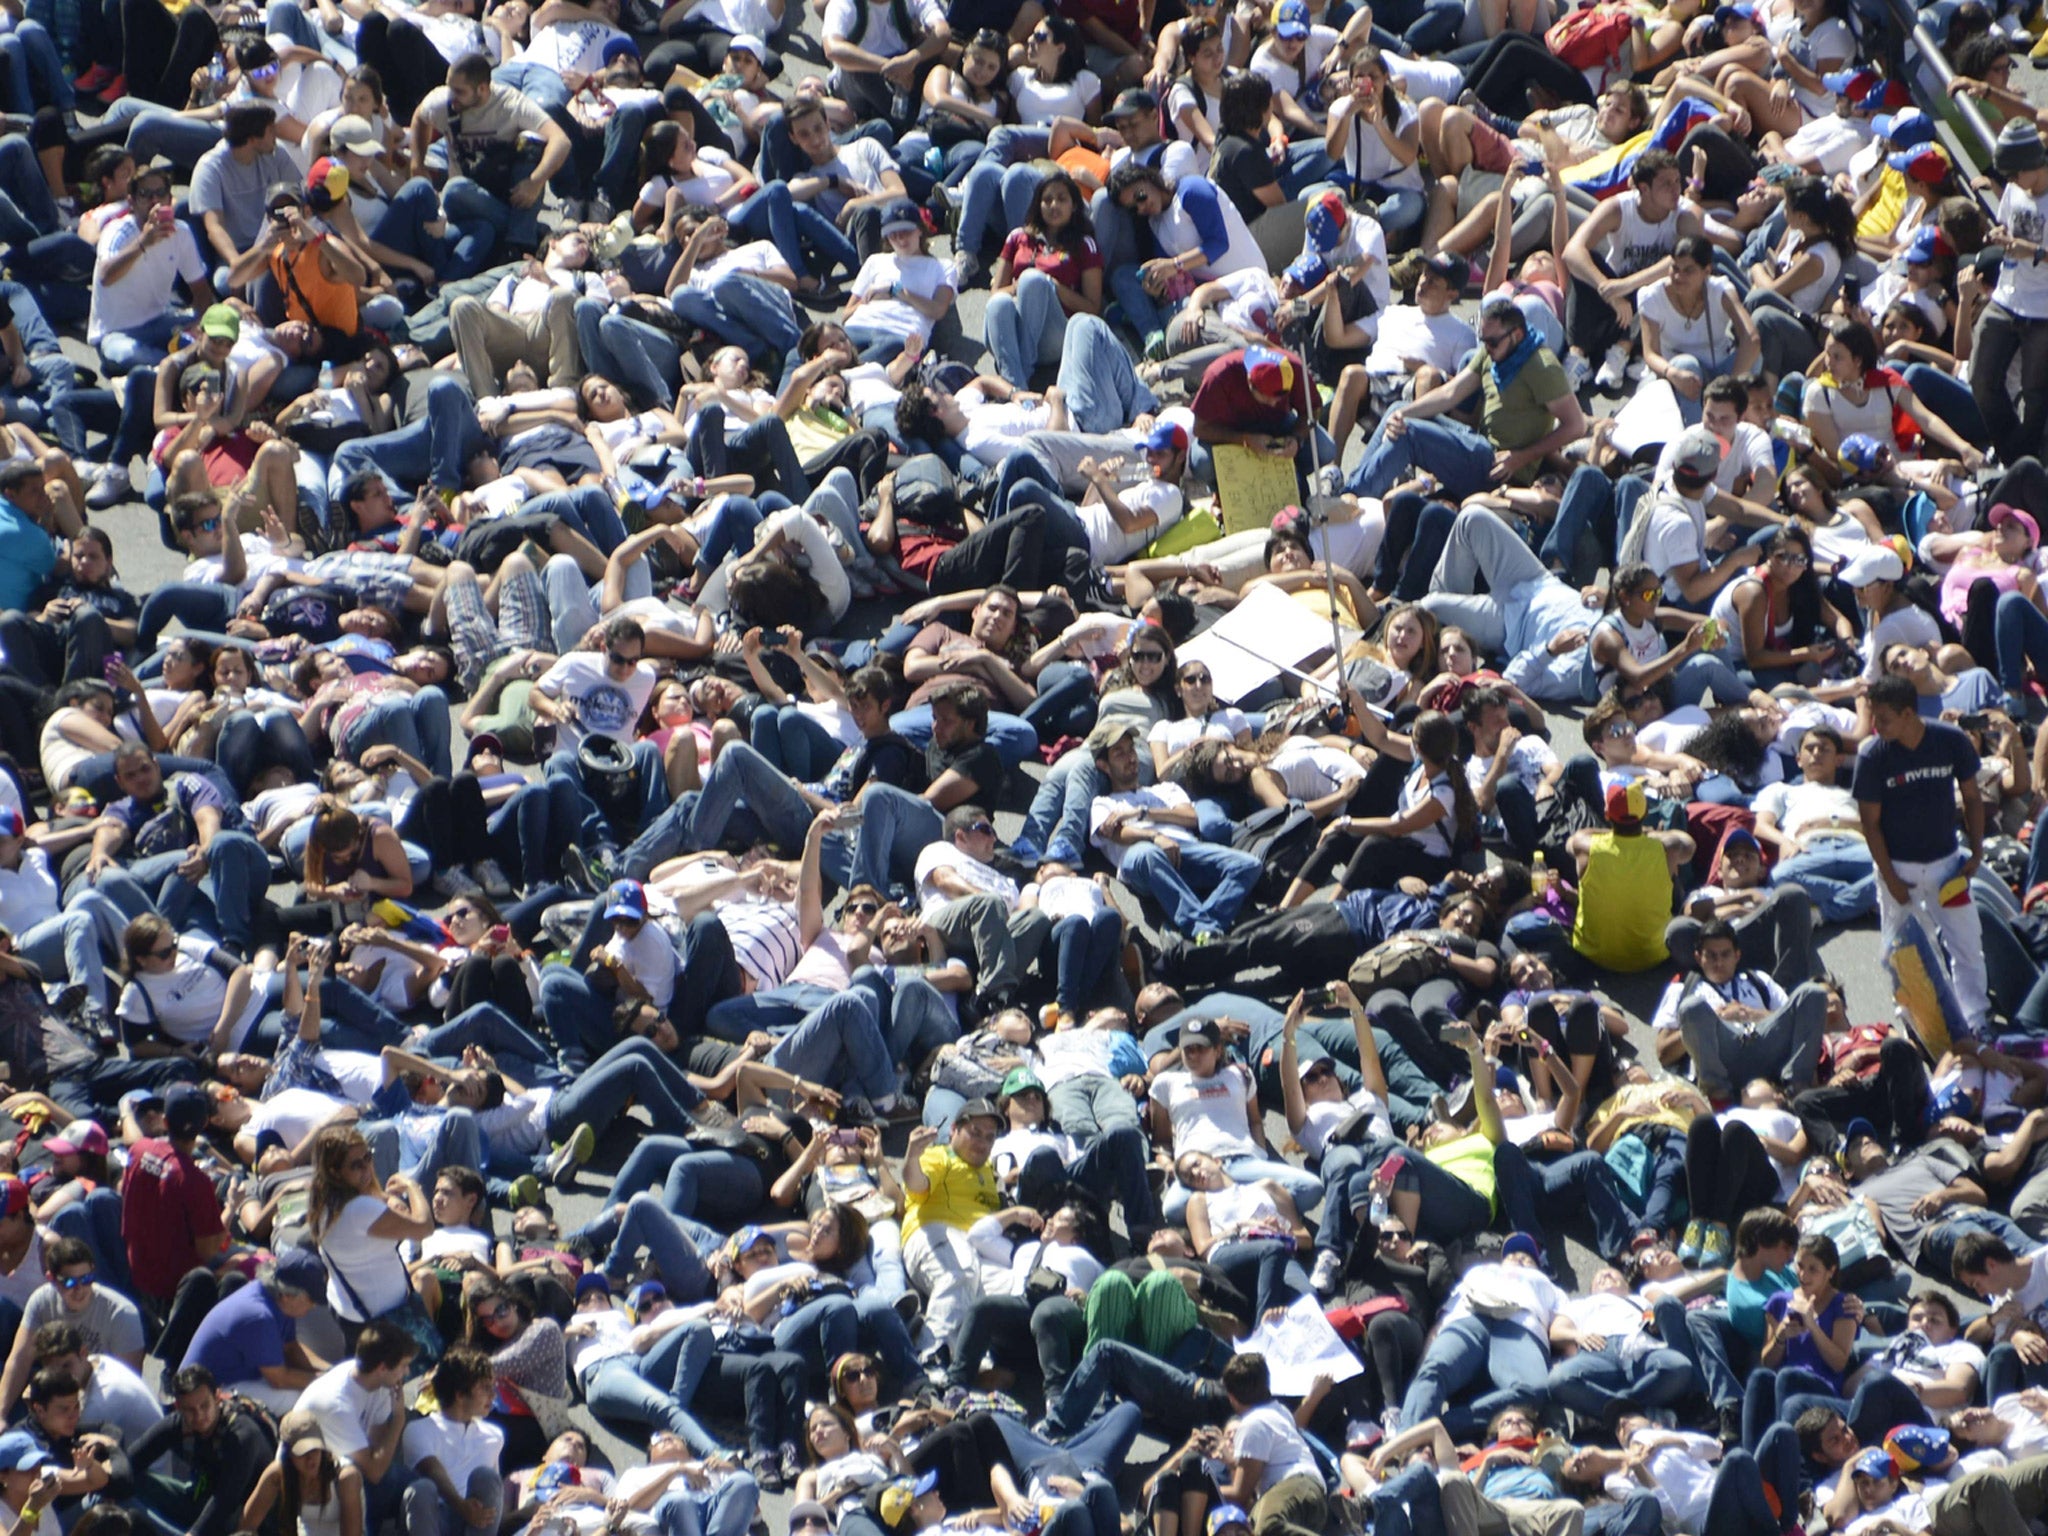 Thousands of students lie on the ground during a protest in front of the Venezuelan Judiciary building in Caracas